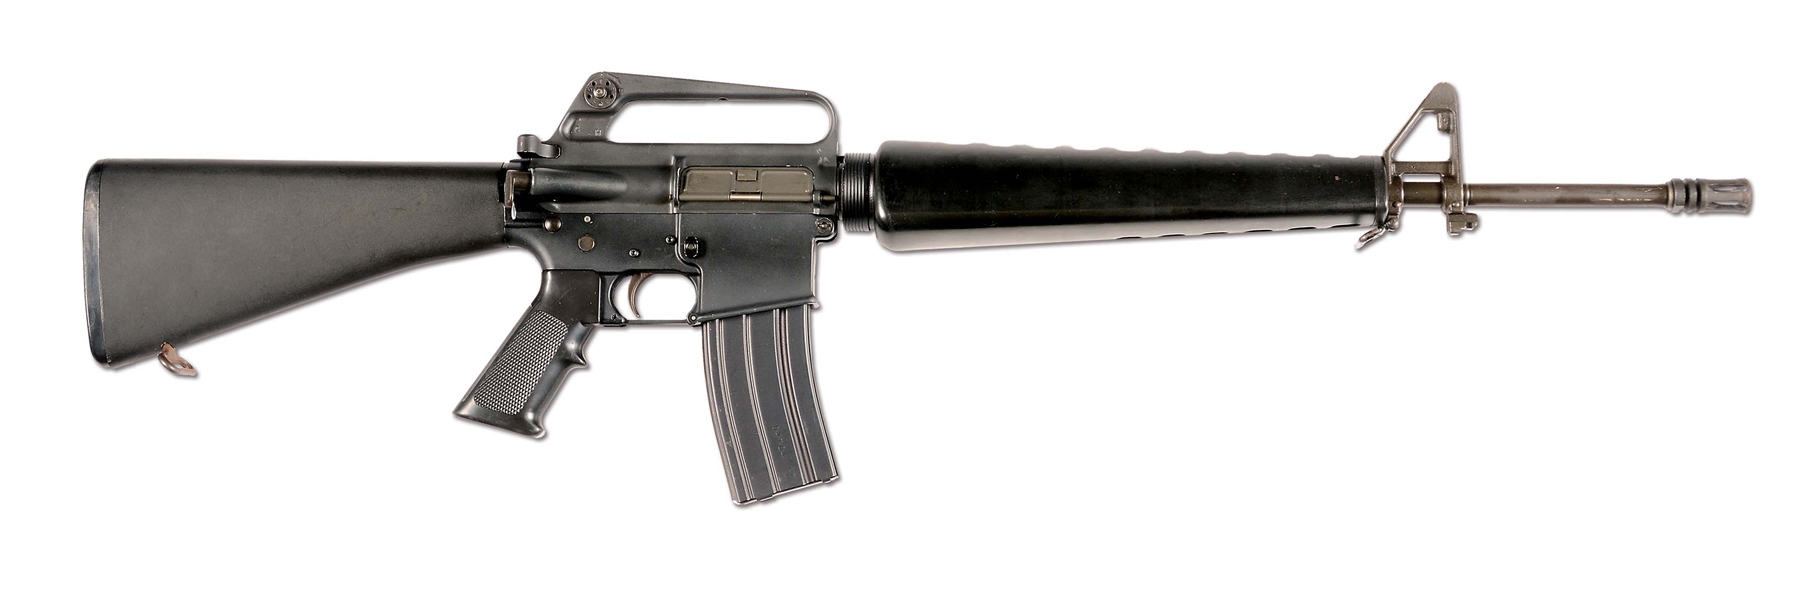 (N) HIGH CONDITION COLT AR-15 A2 SPORTER II CONVERTED TO M16 MACHINE GUN BY FLEMING FIREARMS (FULLY TRANSFERABLE).